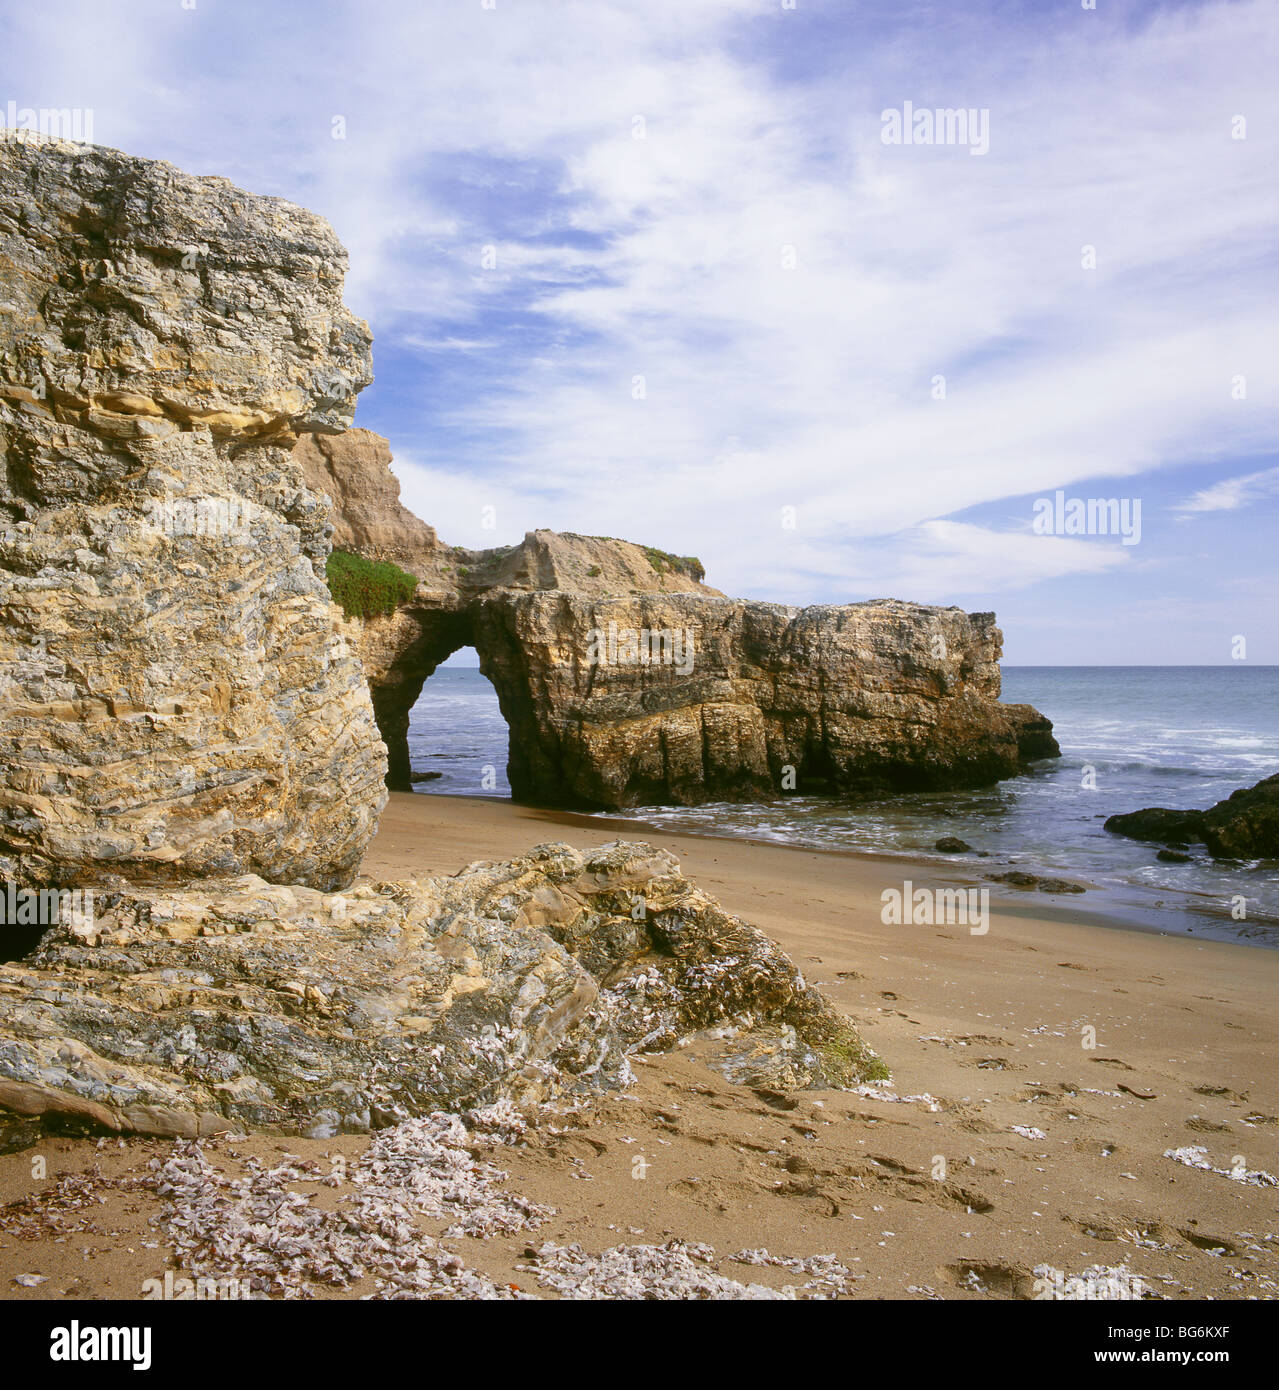 CALIFORNIA - The Pacific Coast viewed through an arched rock at Sculptured Beach in Point Reyes National Seashore. Stock Photo